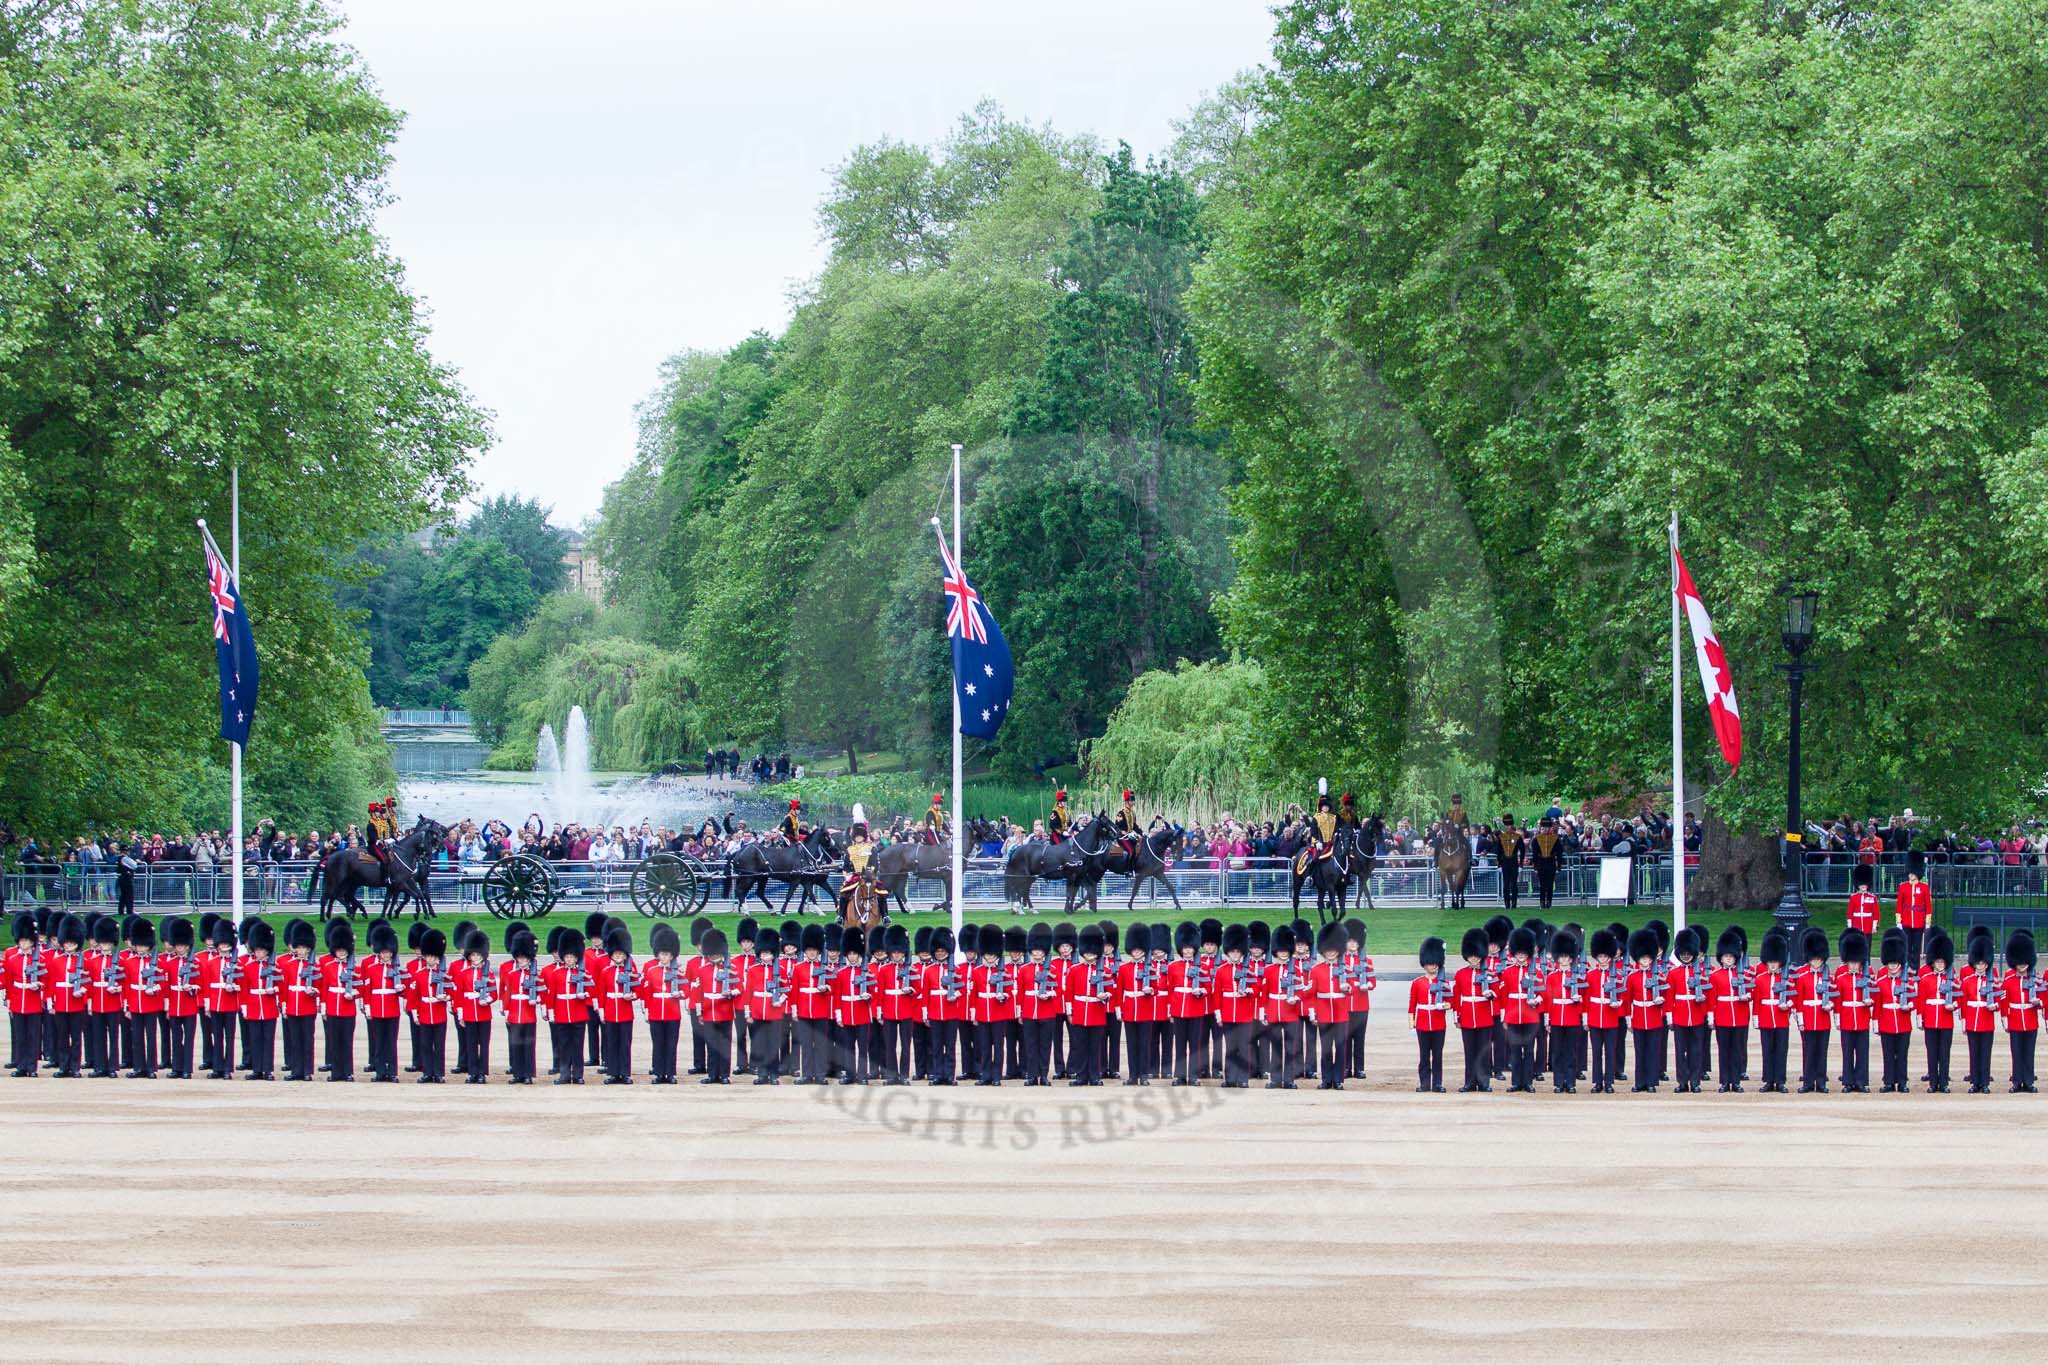 Major General's Review 2013: The King's Troop Royal Horse Artillery arriving on the northern side of Horse Guards Parade, with St James's Park in the background..
Horse Guards Parade, Westminster,
London SW1,

United Kingdom,
on 01 June 2013 at 10:38, image #158